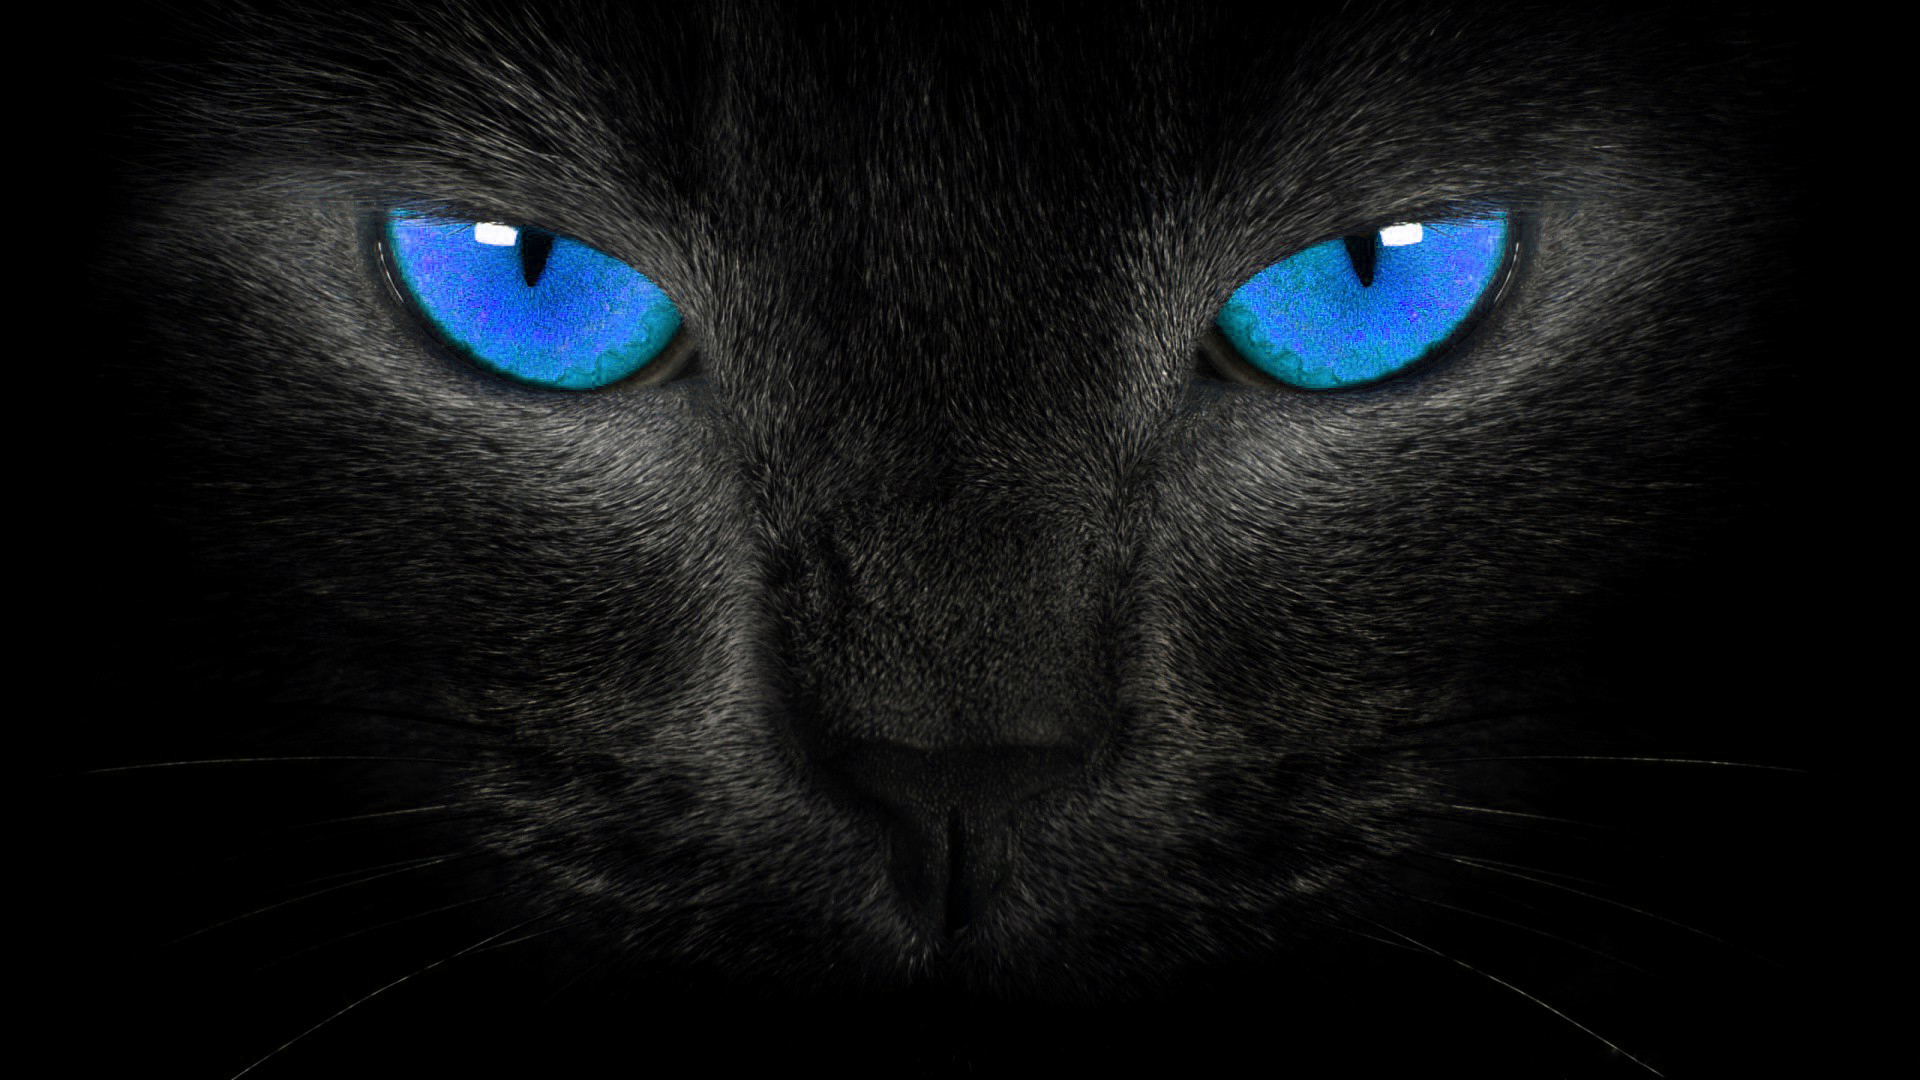 Free Download Black Cat Blue Eyes Wallpaper Hd Widescreen Wallpapers Animals Photo 19x1080 For Your Desktop Mobile Tablet Explore 71 Blue Eyes Wallpaper Cute Blue Wallpaper Pretty Blue Wallpaper